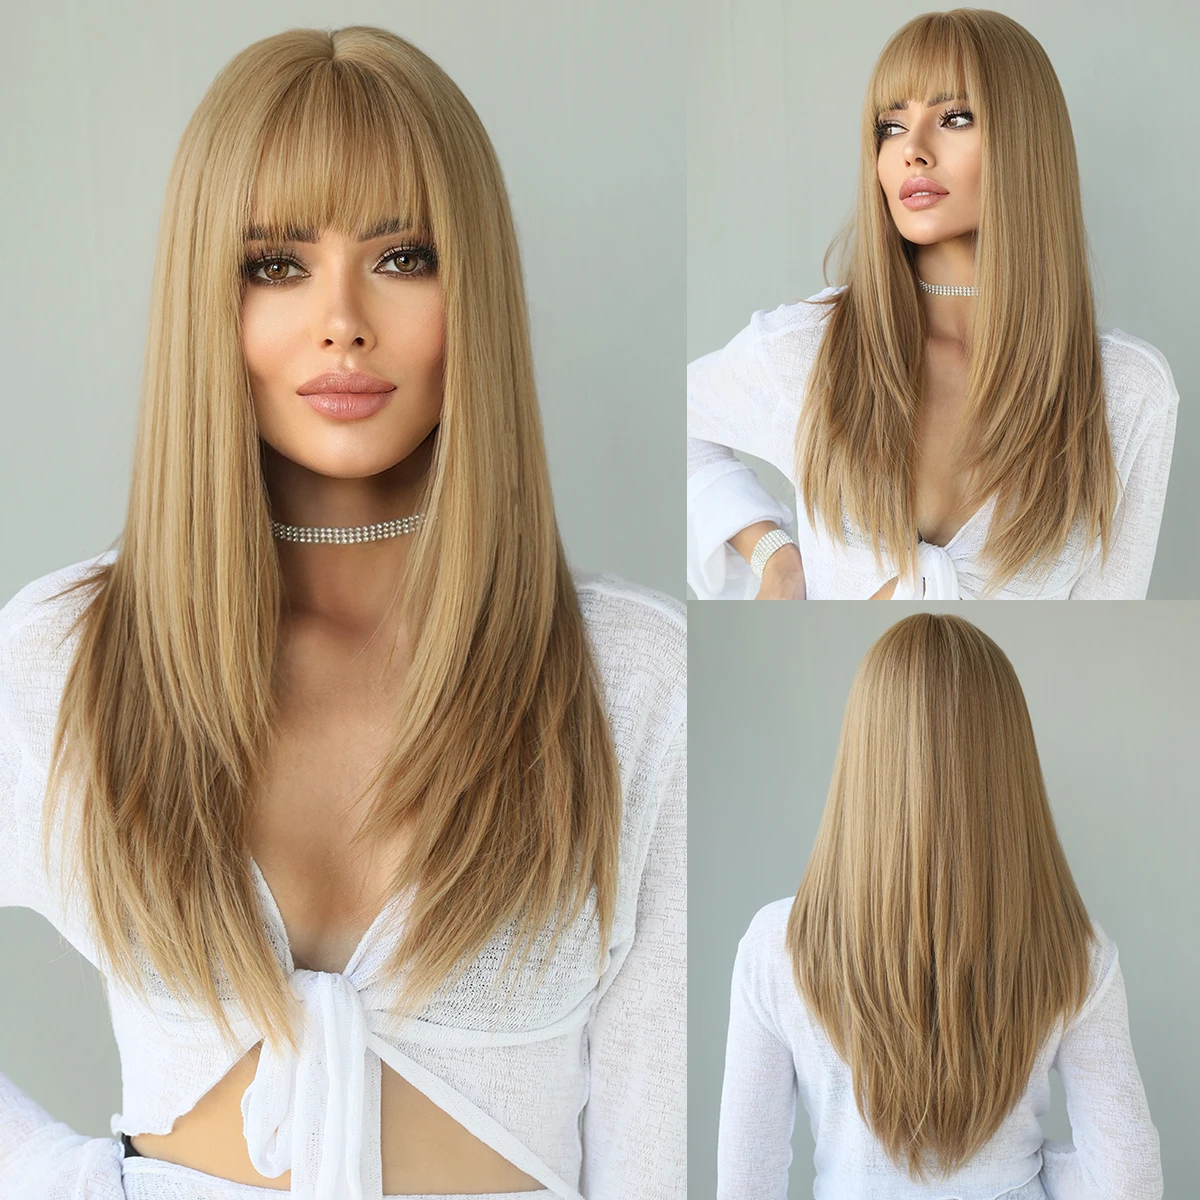 NAMM Synthetic Blonde Wigs with Bangs Long Straight Hair Wigs for Women Cosplay Wig Party Heat Resistant Hair Natural Female Wig shine ombre blonde wig with bangs full machine made synthetic body wave wig heat temperature fiber wig 30 inch none lace wig